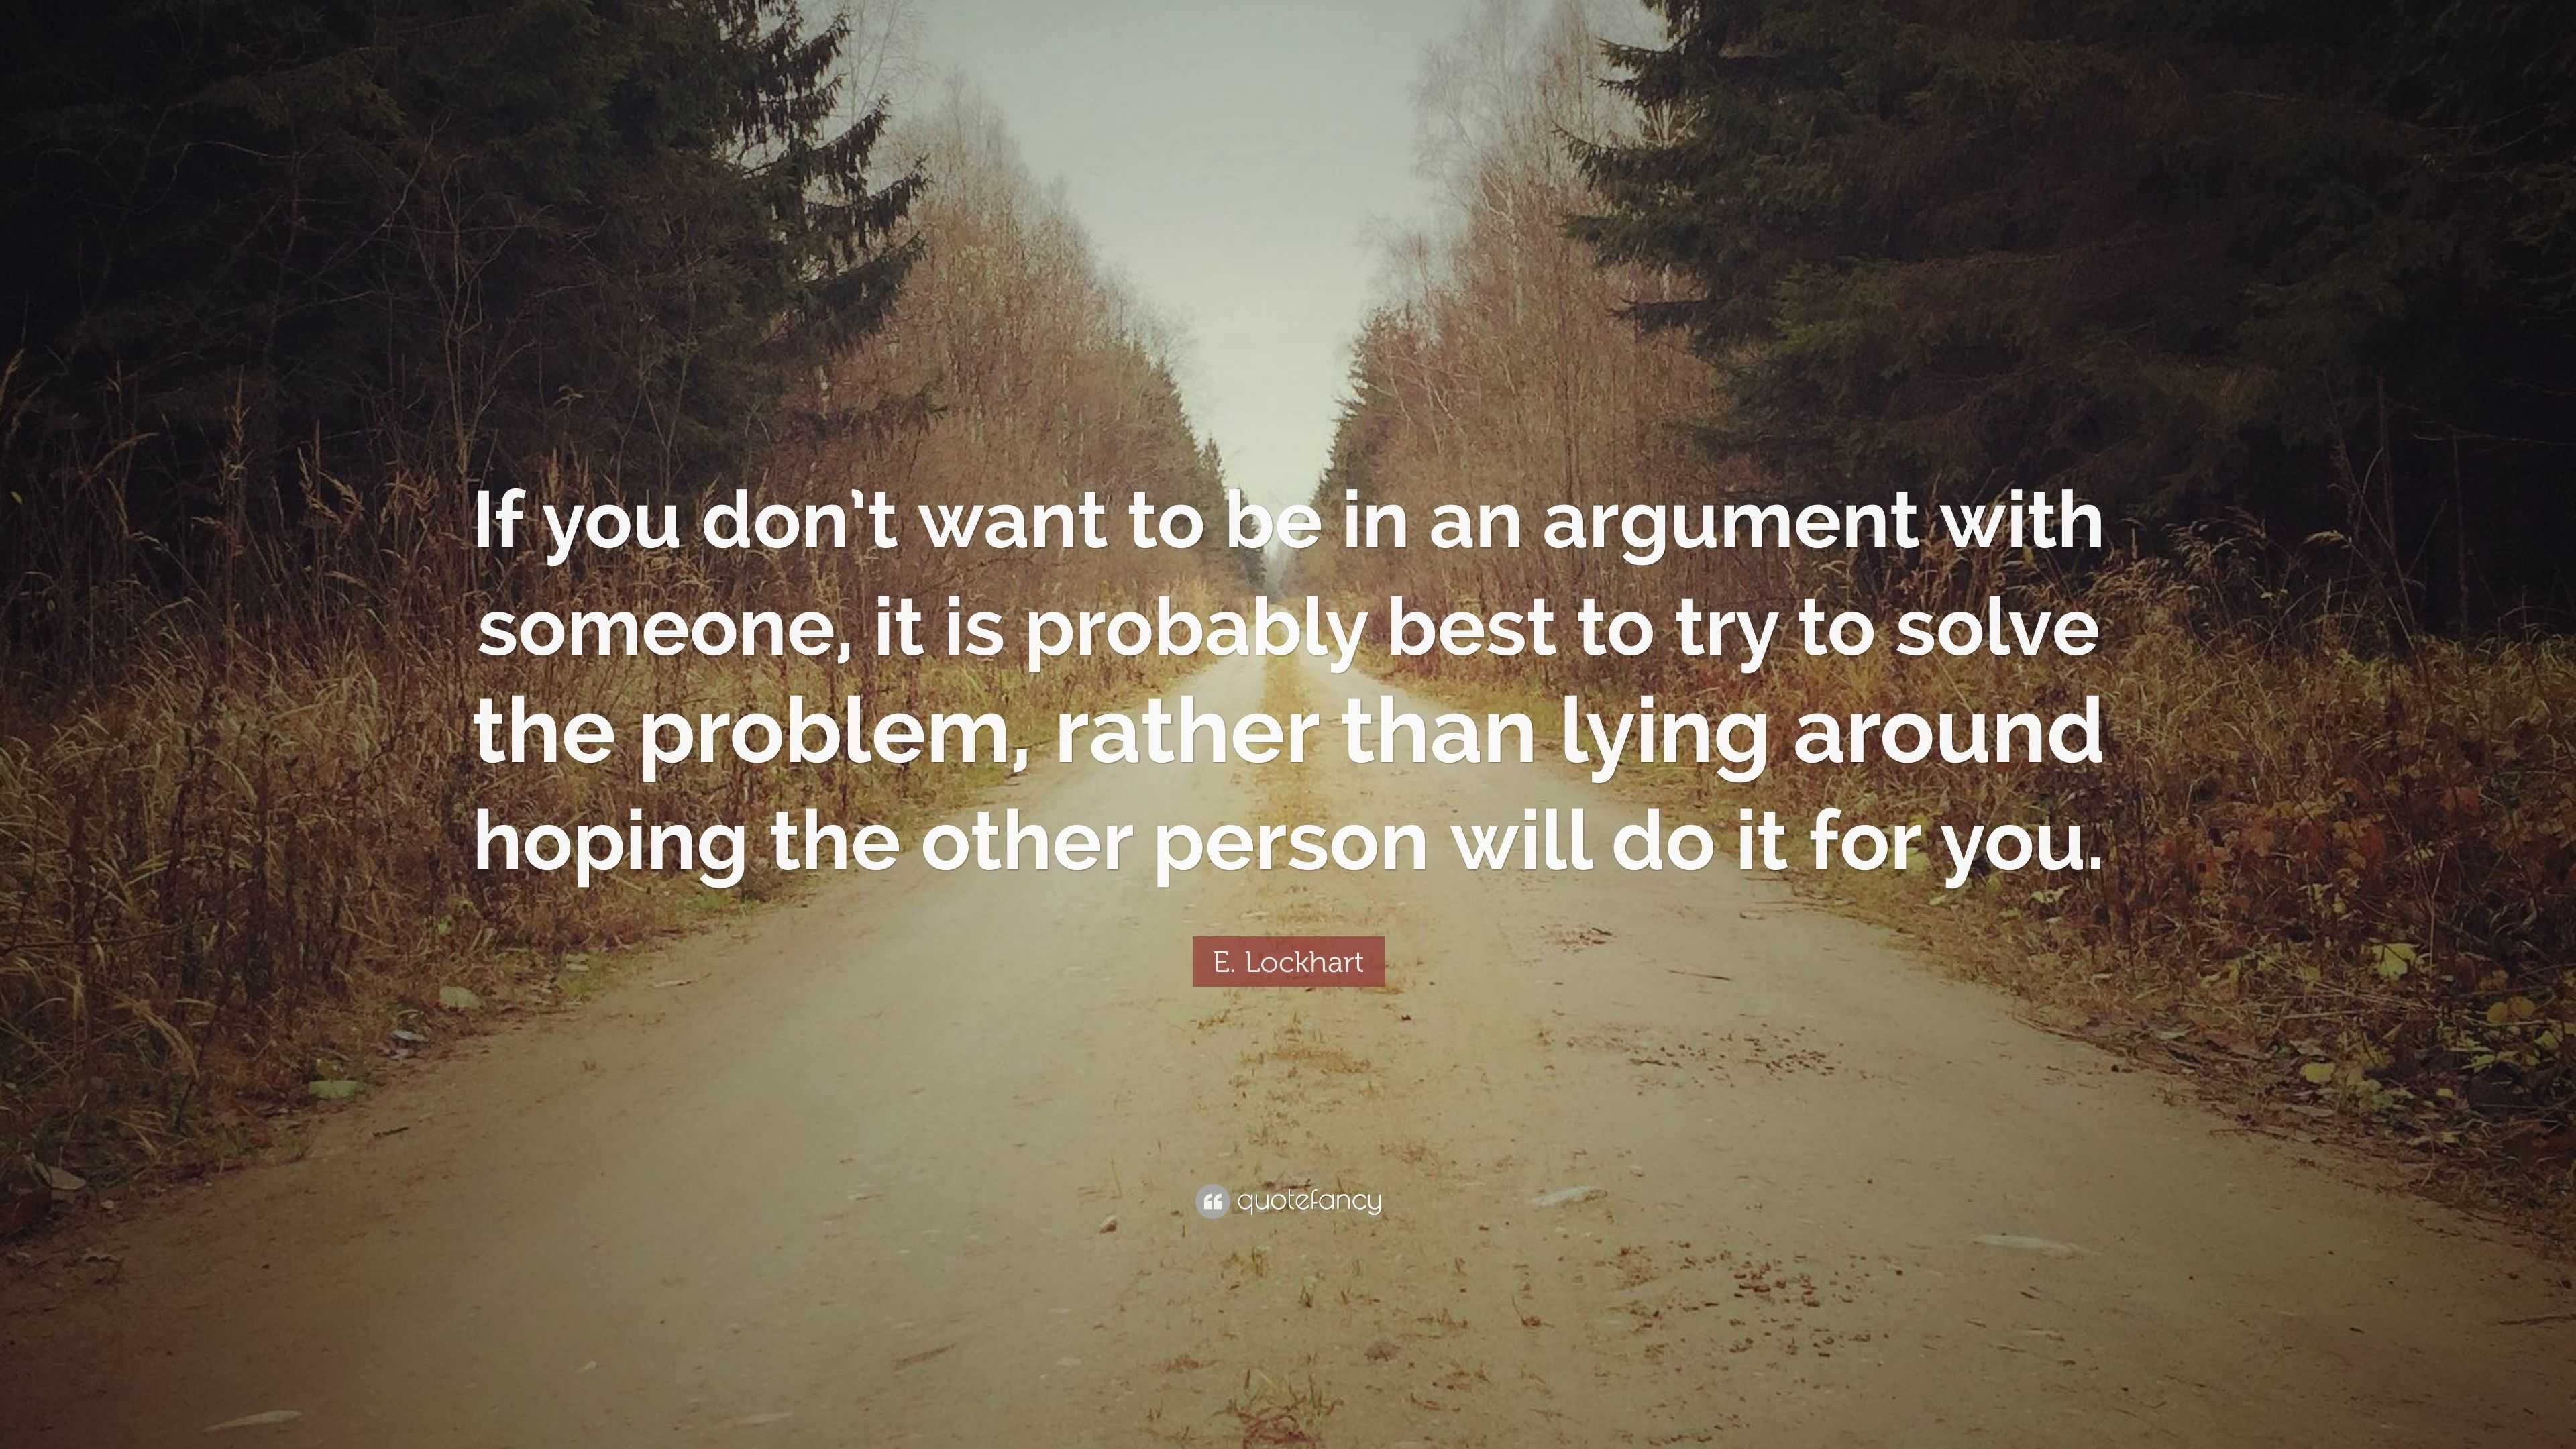 E Lockhart Quote If You Don T Want To Be In An Argument With Someone It Is Probably Best To Try To Solve The Problem Rather Than Lying